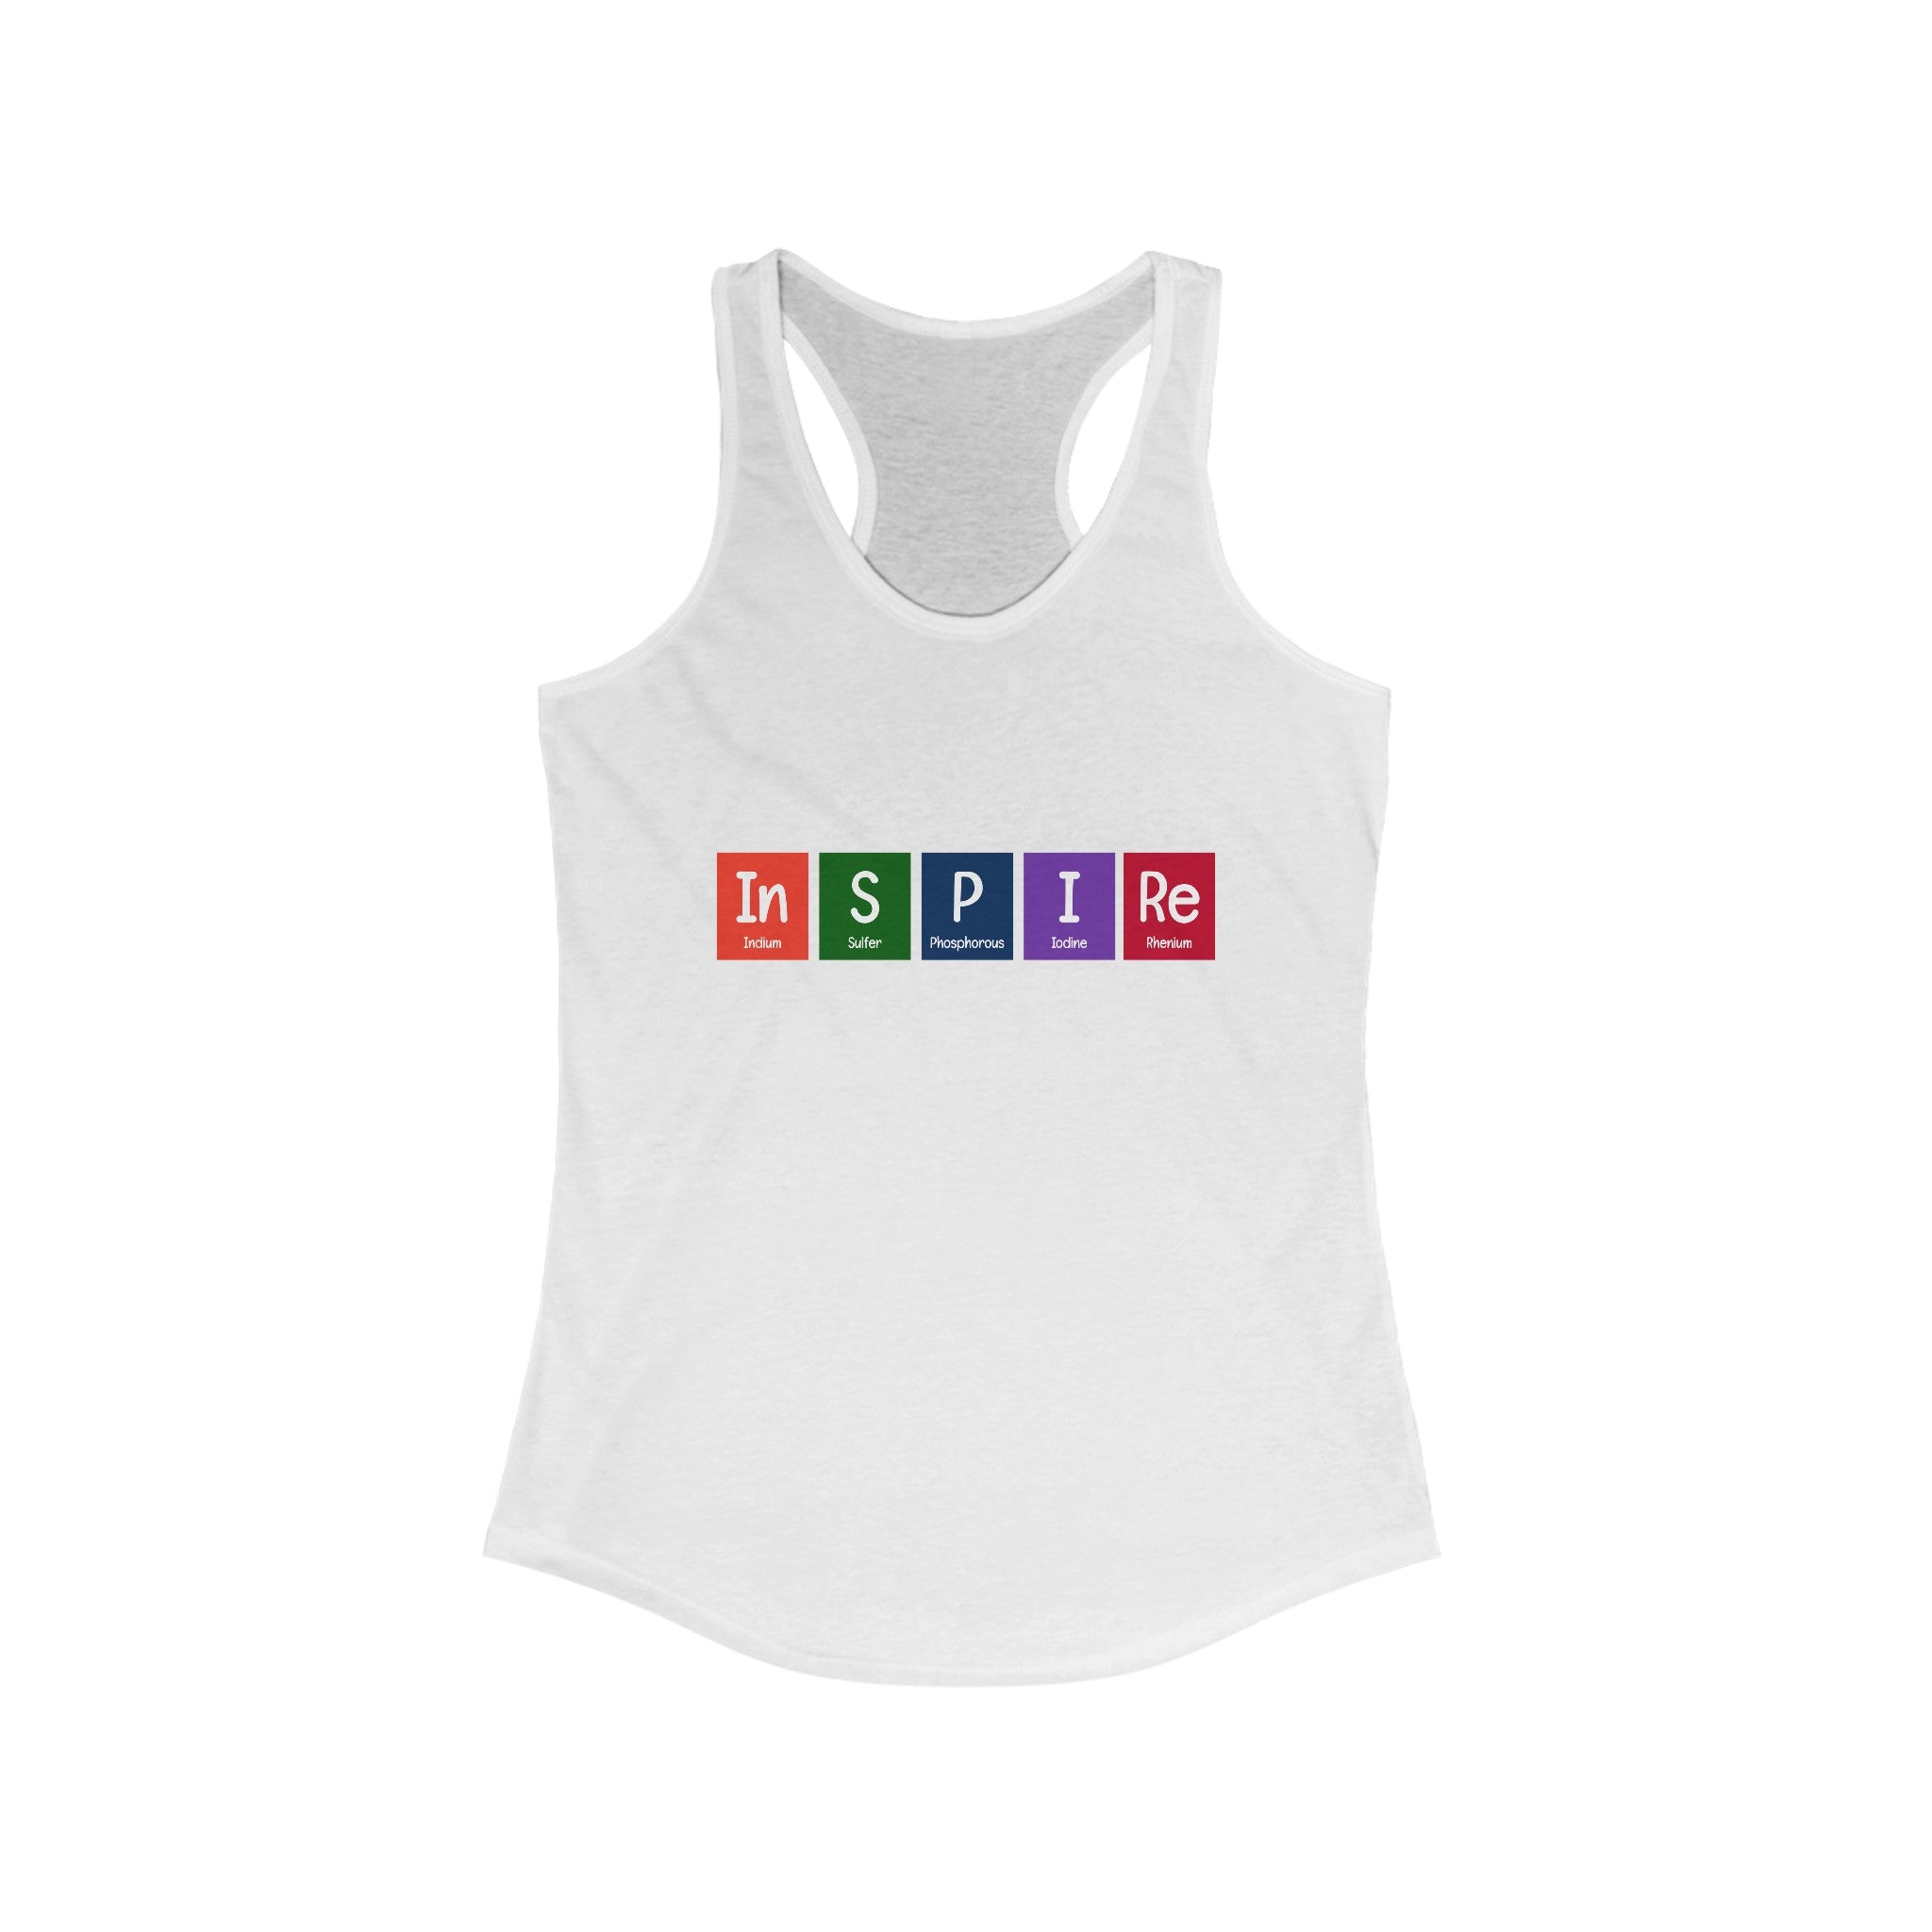 Ultra-light In-S-P-I-Re - Women's Racerback Tank featuring the word "INSPIRE" in colorful blocks resembling periodic table elements. Stylish and comfy, it's perfect for active living.